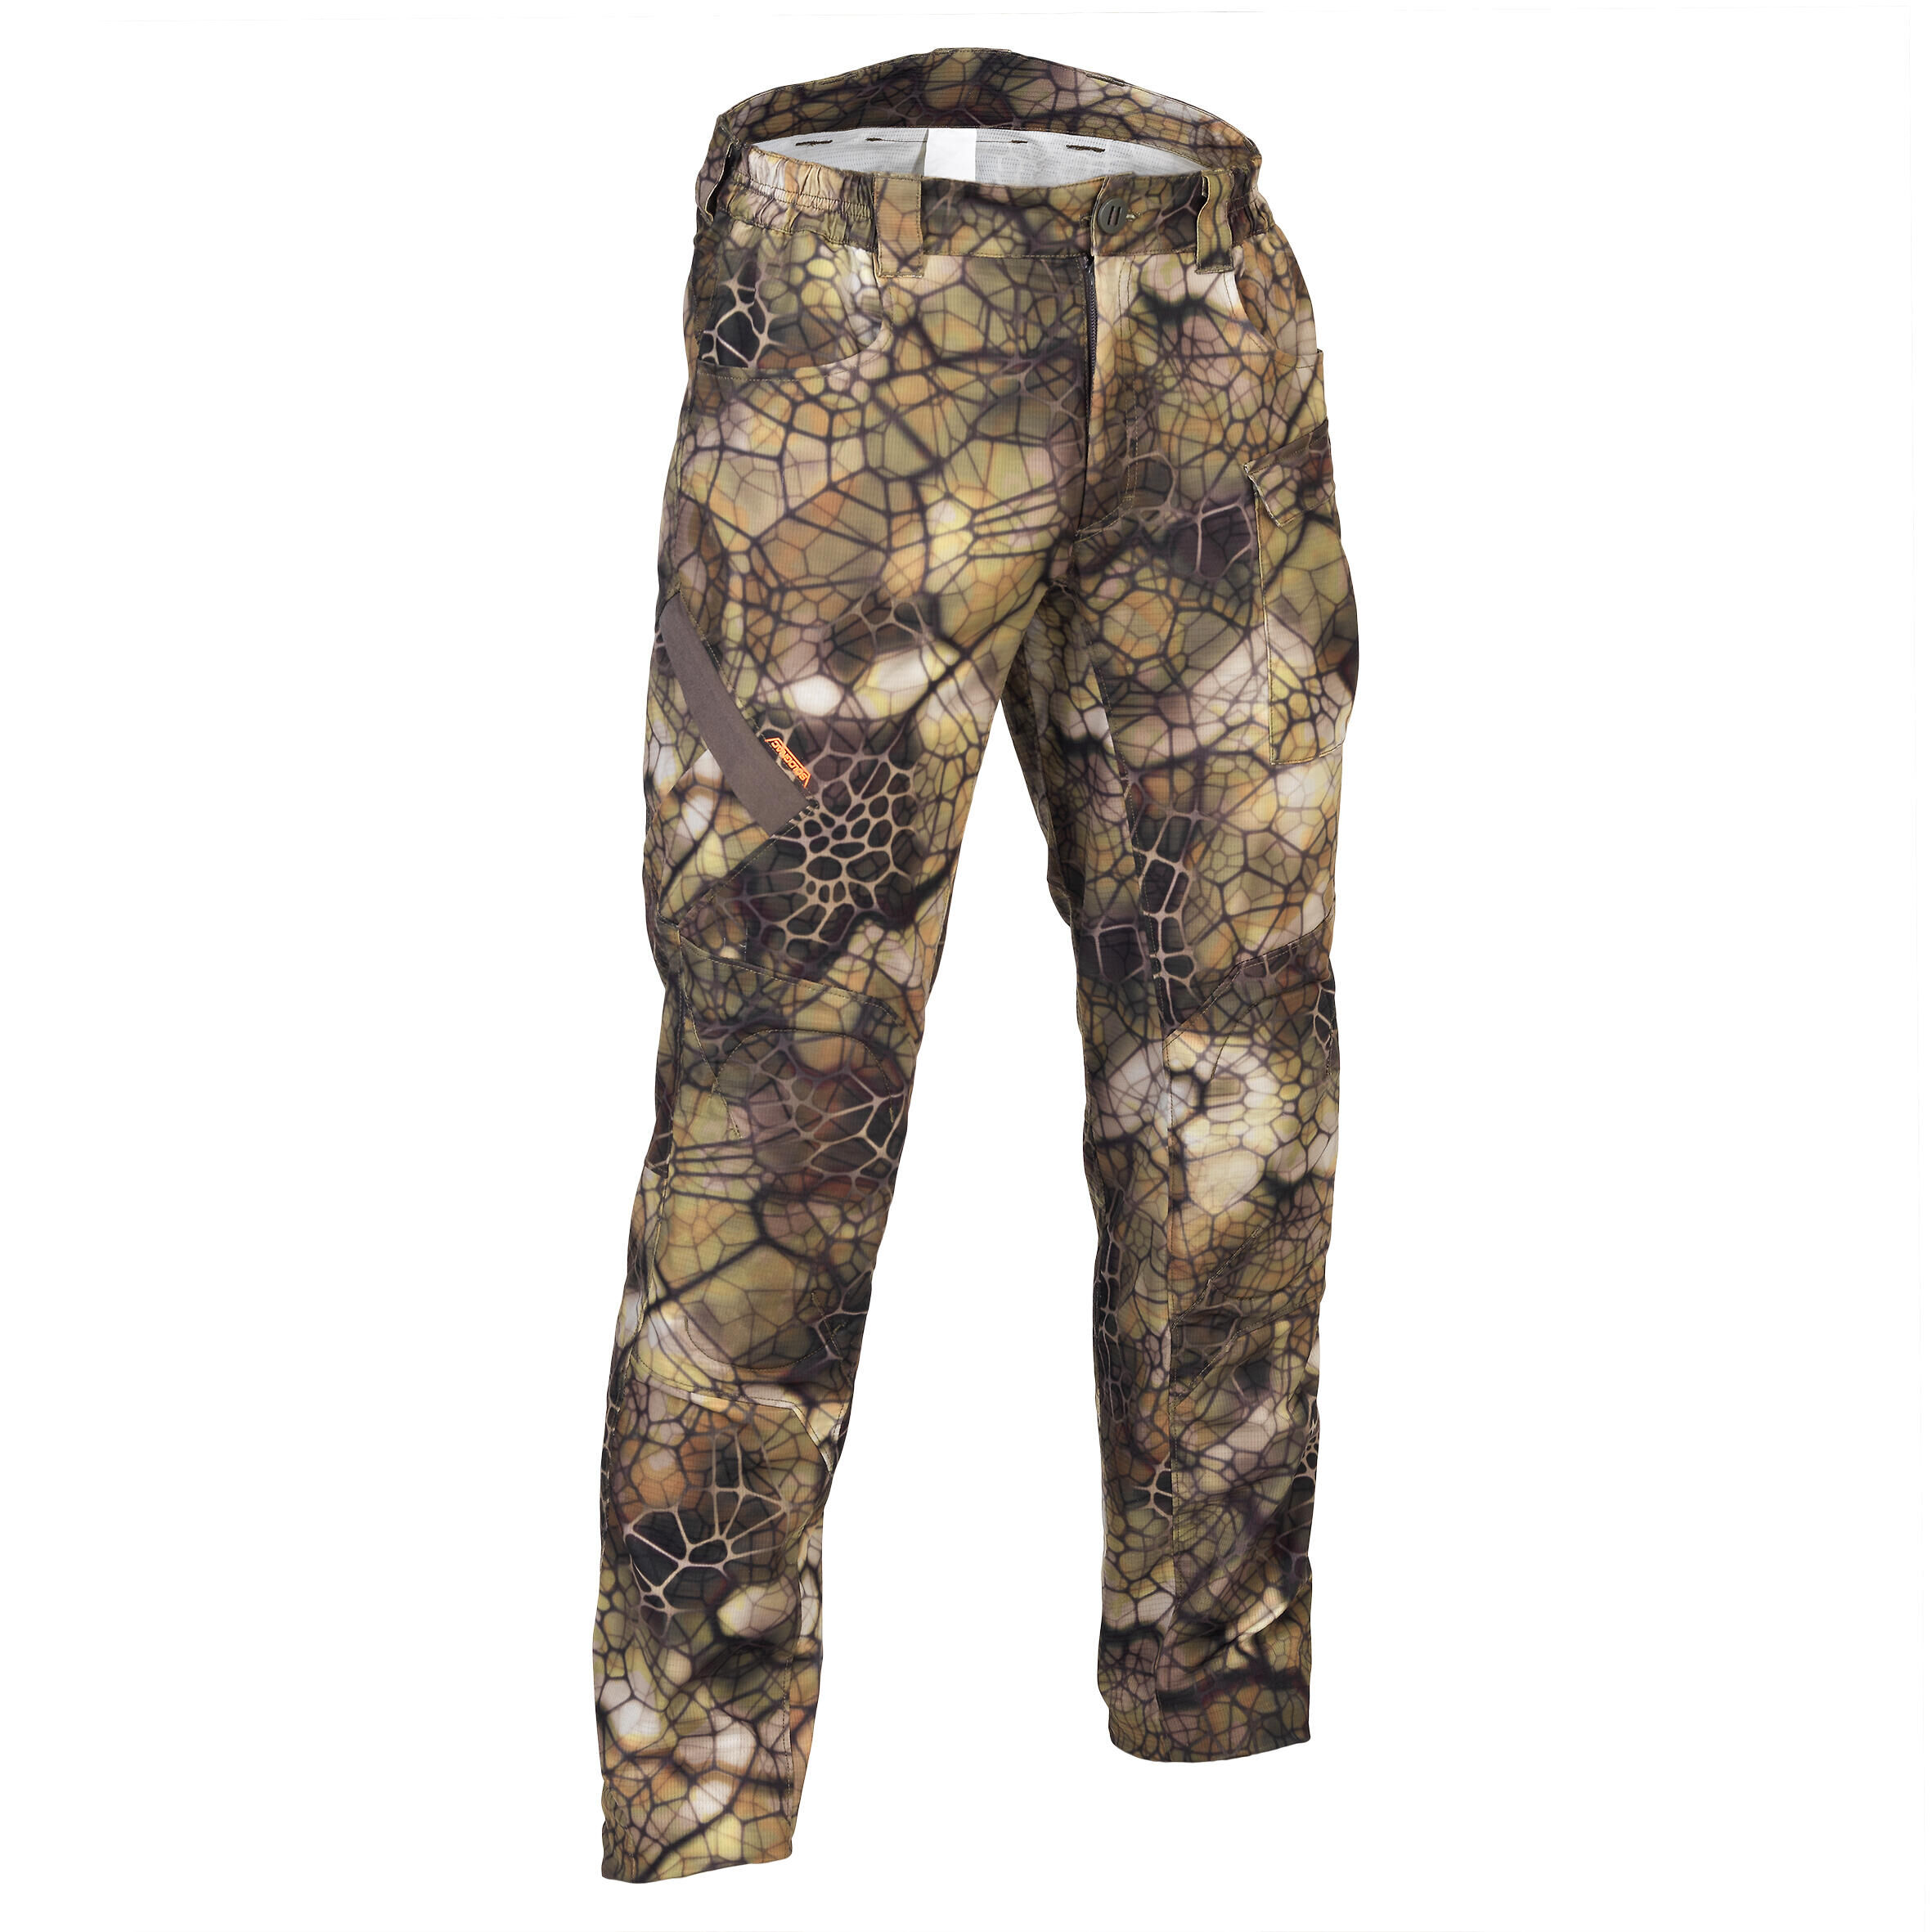 SOLOGNAC Hunting Silent Breathable Trousers 900 - Furtiv Camouflage